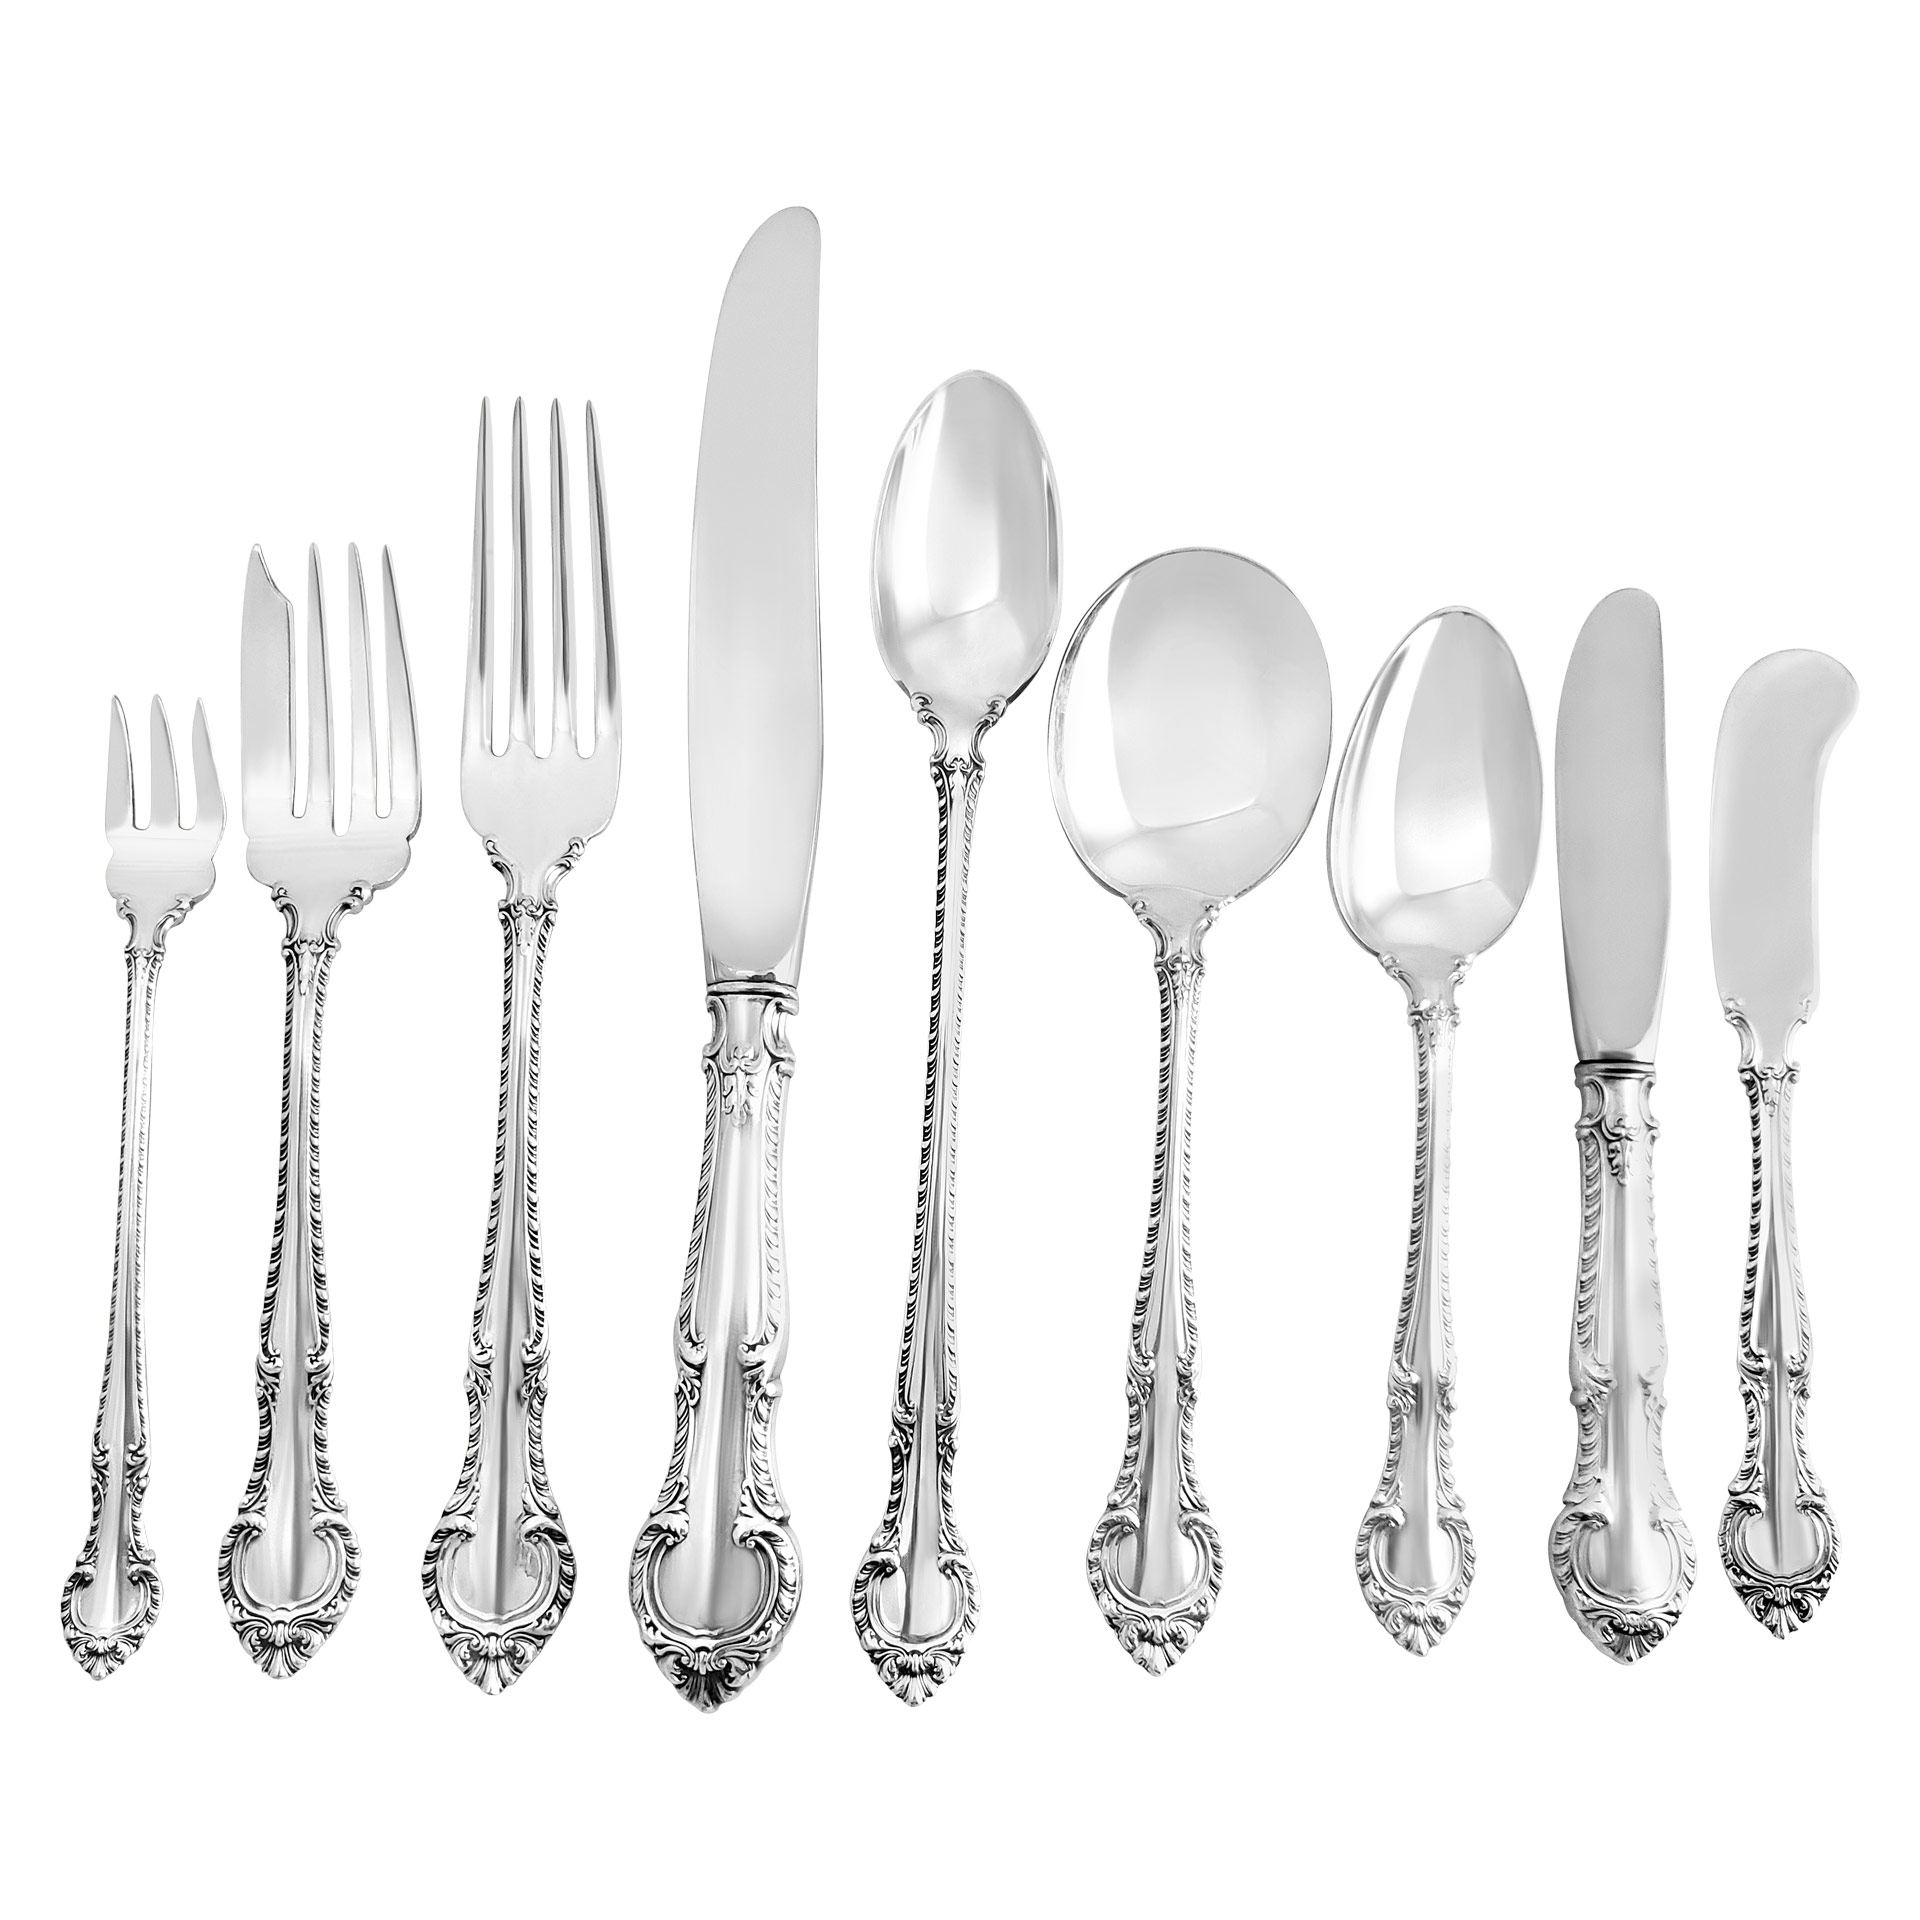 "ENGLISH GADROON" sterling silver flatware set by Gorham, patented in 1939- 8 place setting for 12 + 18 serving  pieces.